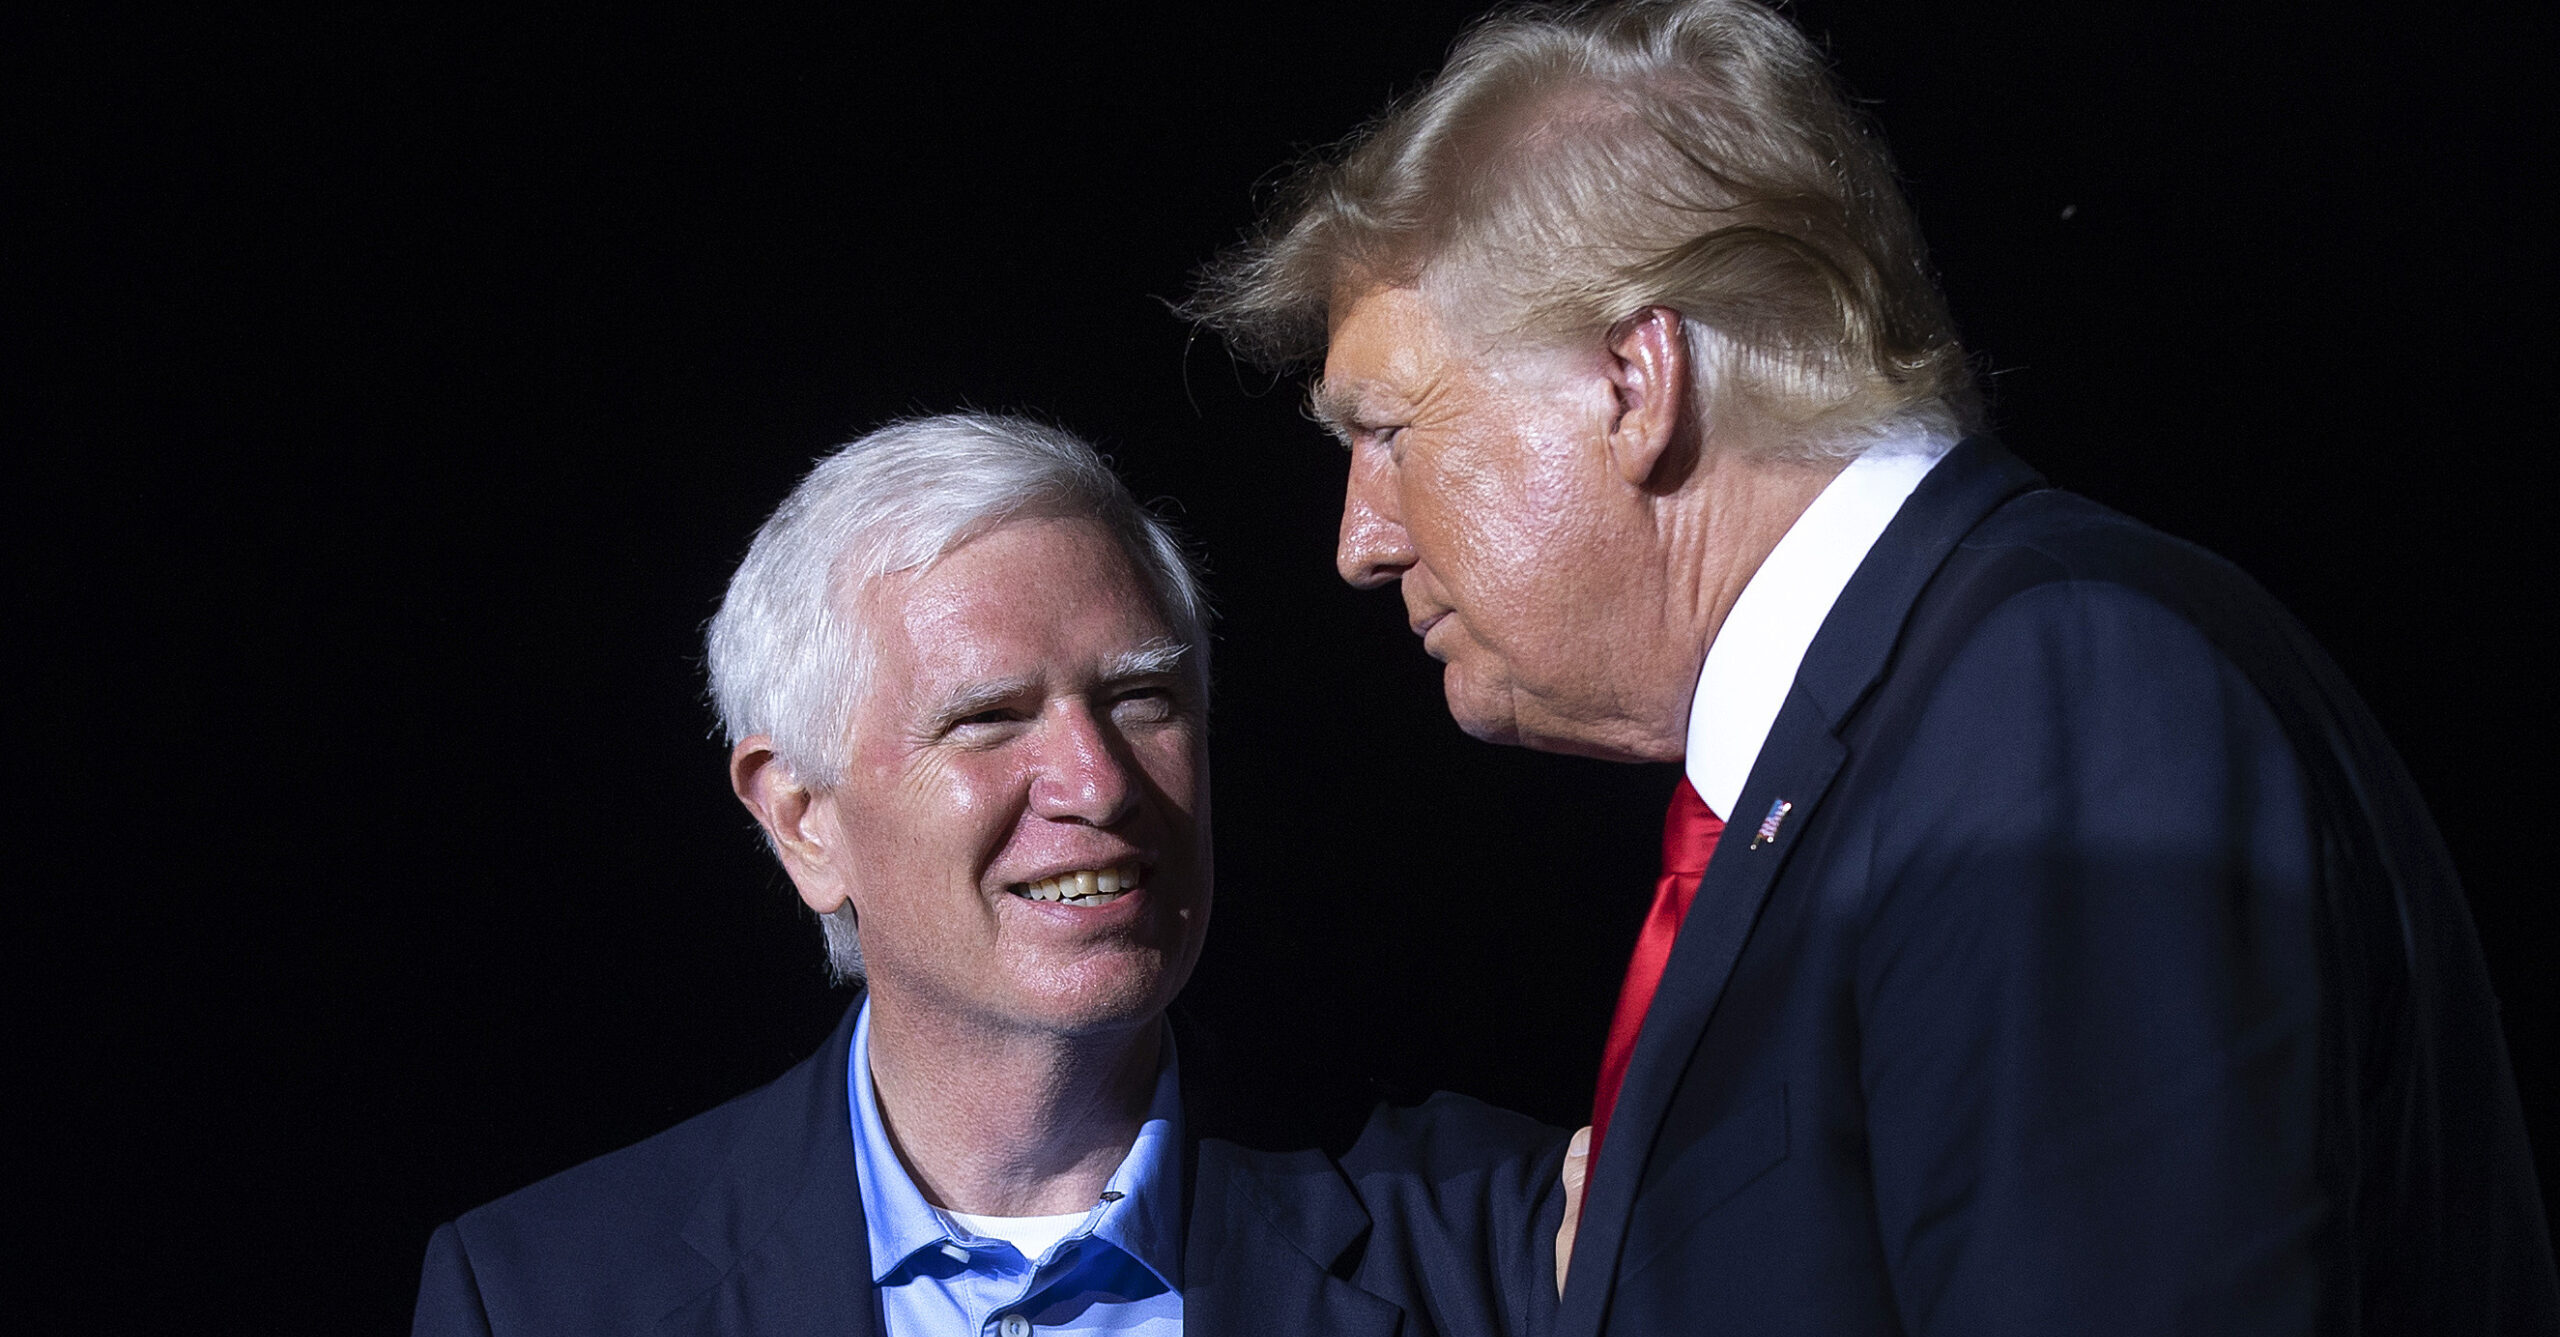 Trump Withdraws Endorsement of 'Woke' Mo Brooks After He Dips in the Polls